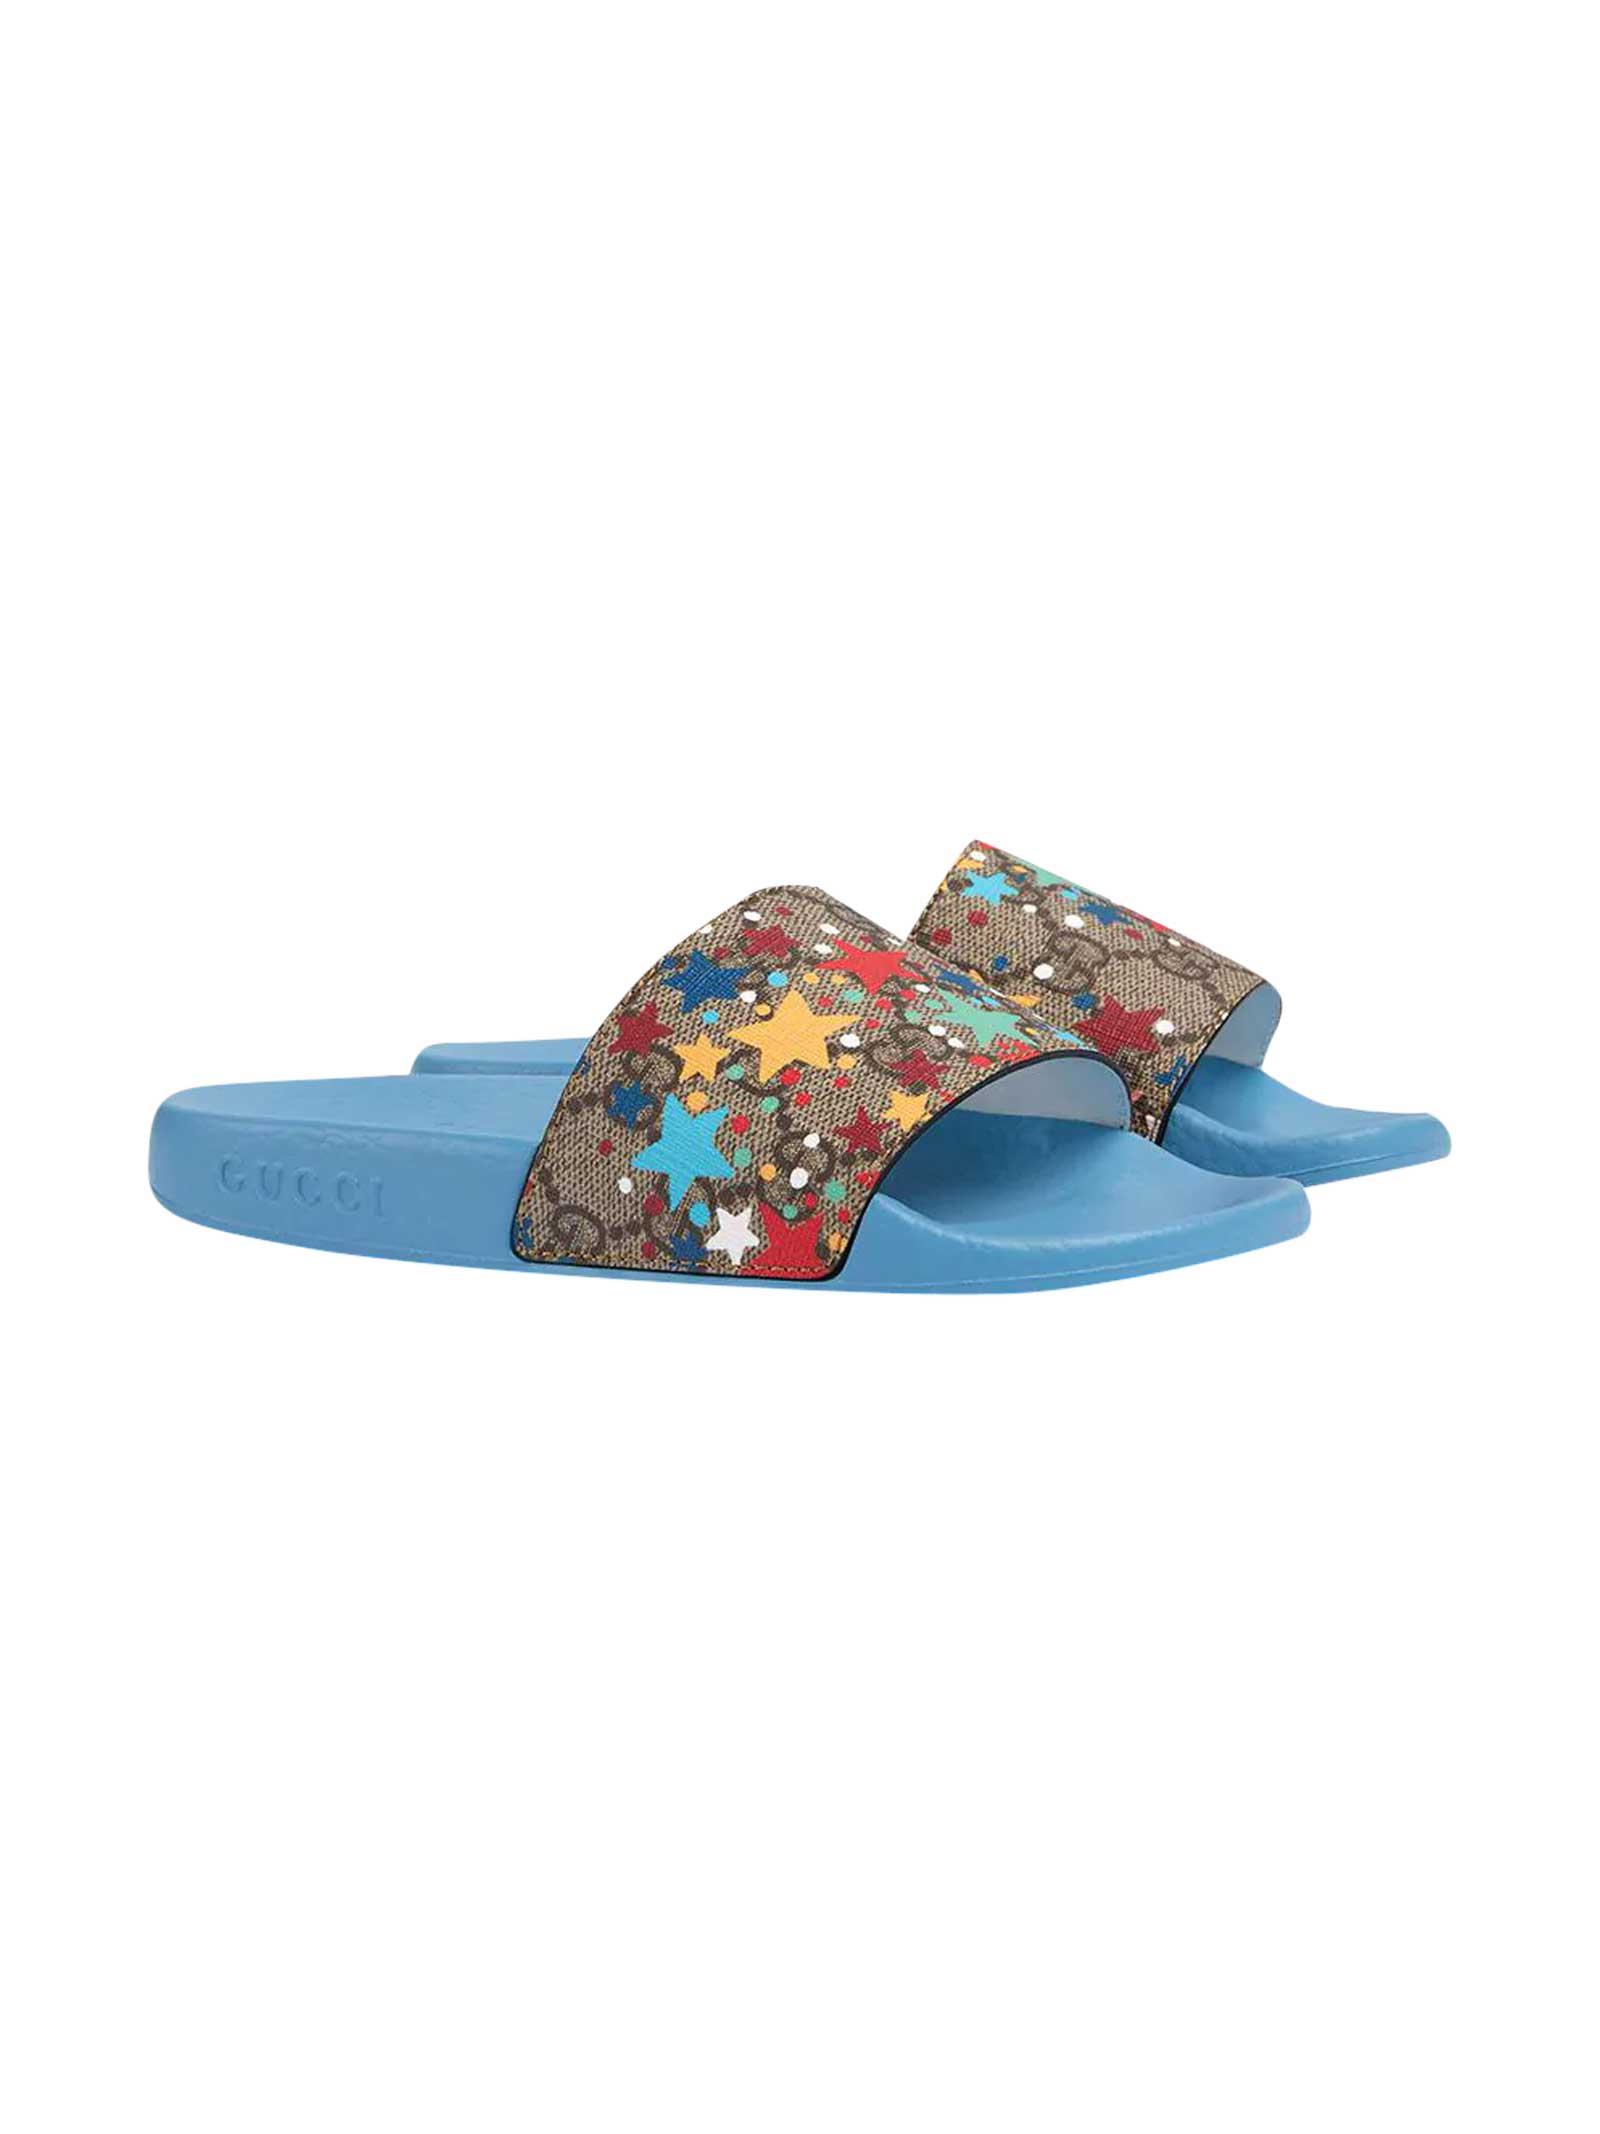 Buy Gucci Blue Slippers online, shop Gucci shoes with free shipping